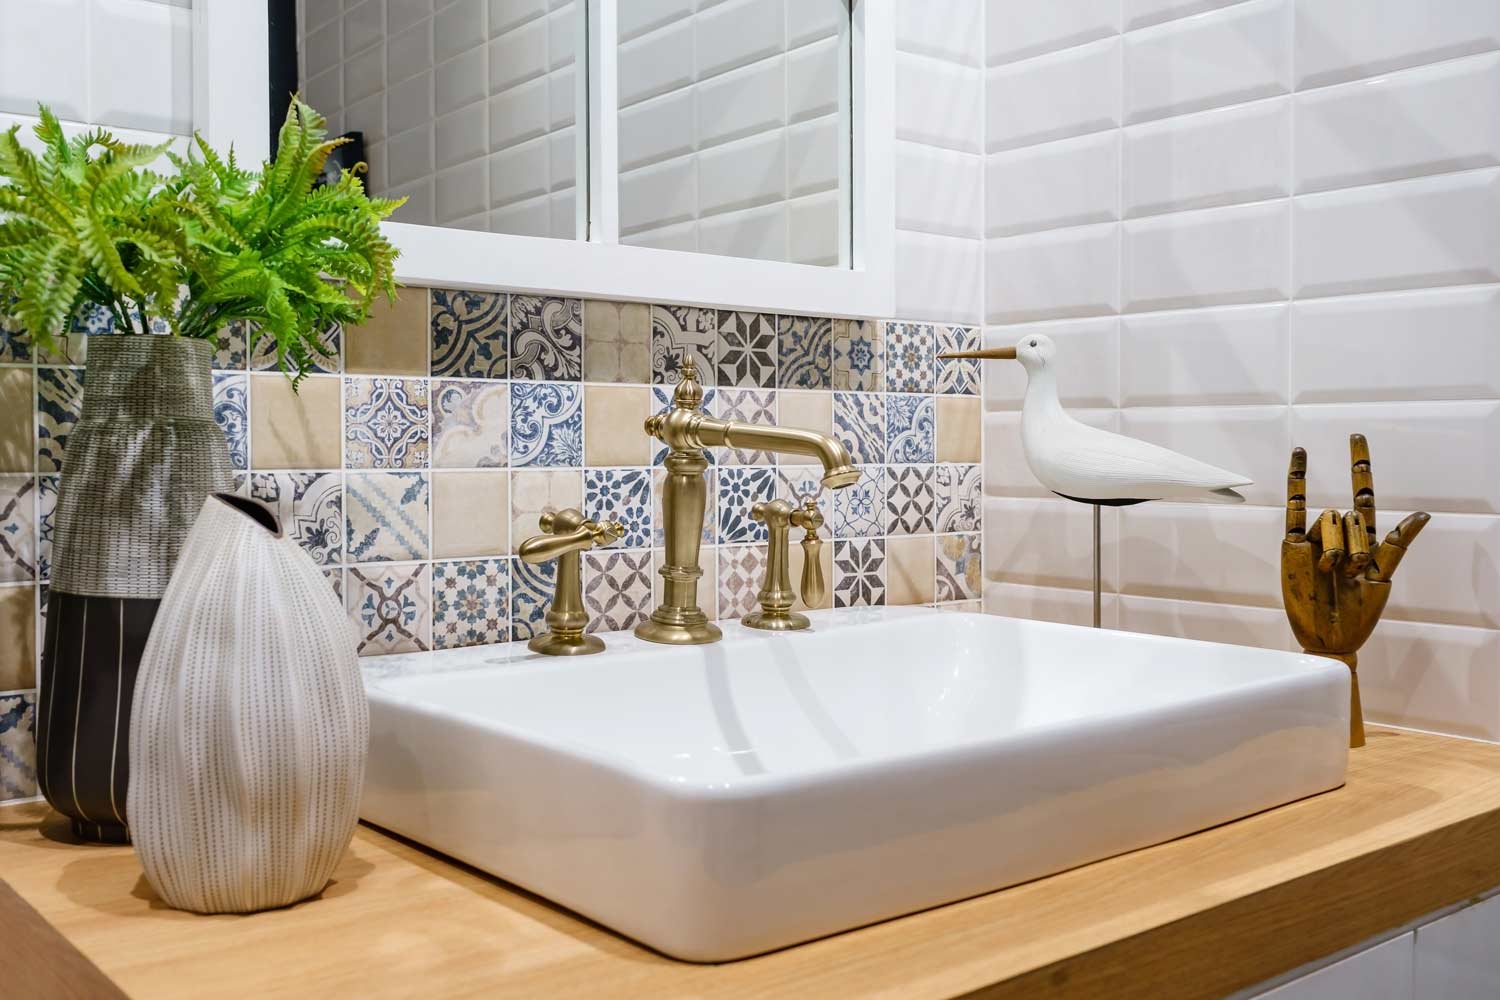 An Ultimate Guide To Subway Tile Design, How To Calculate Subway Tile For Shower